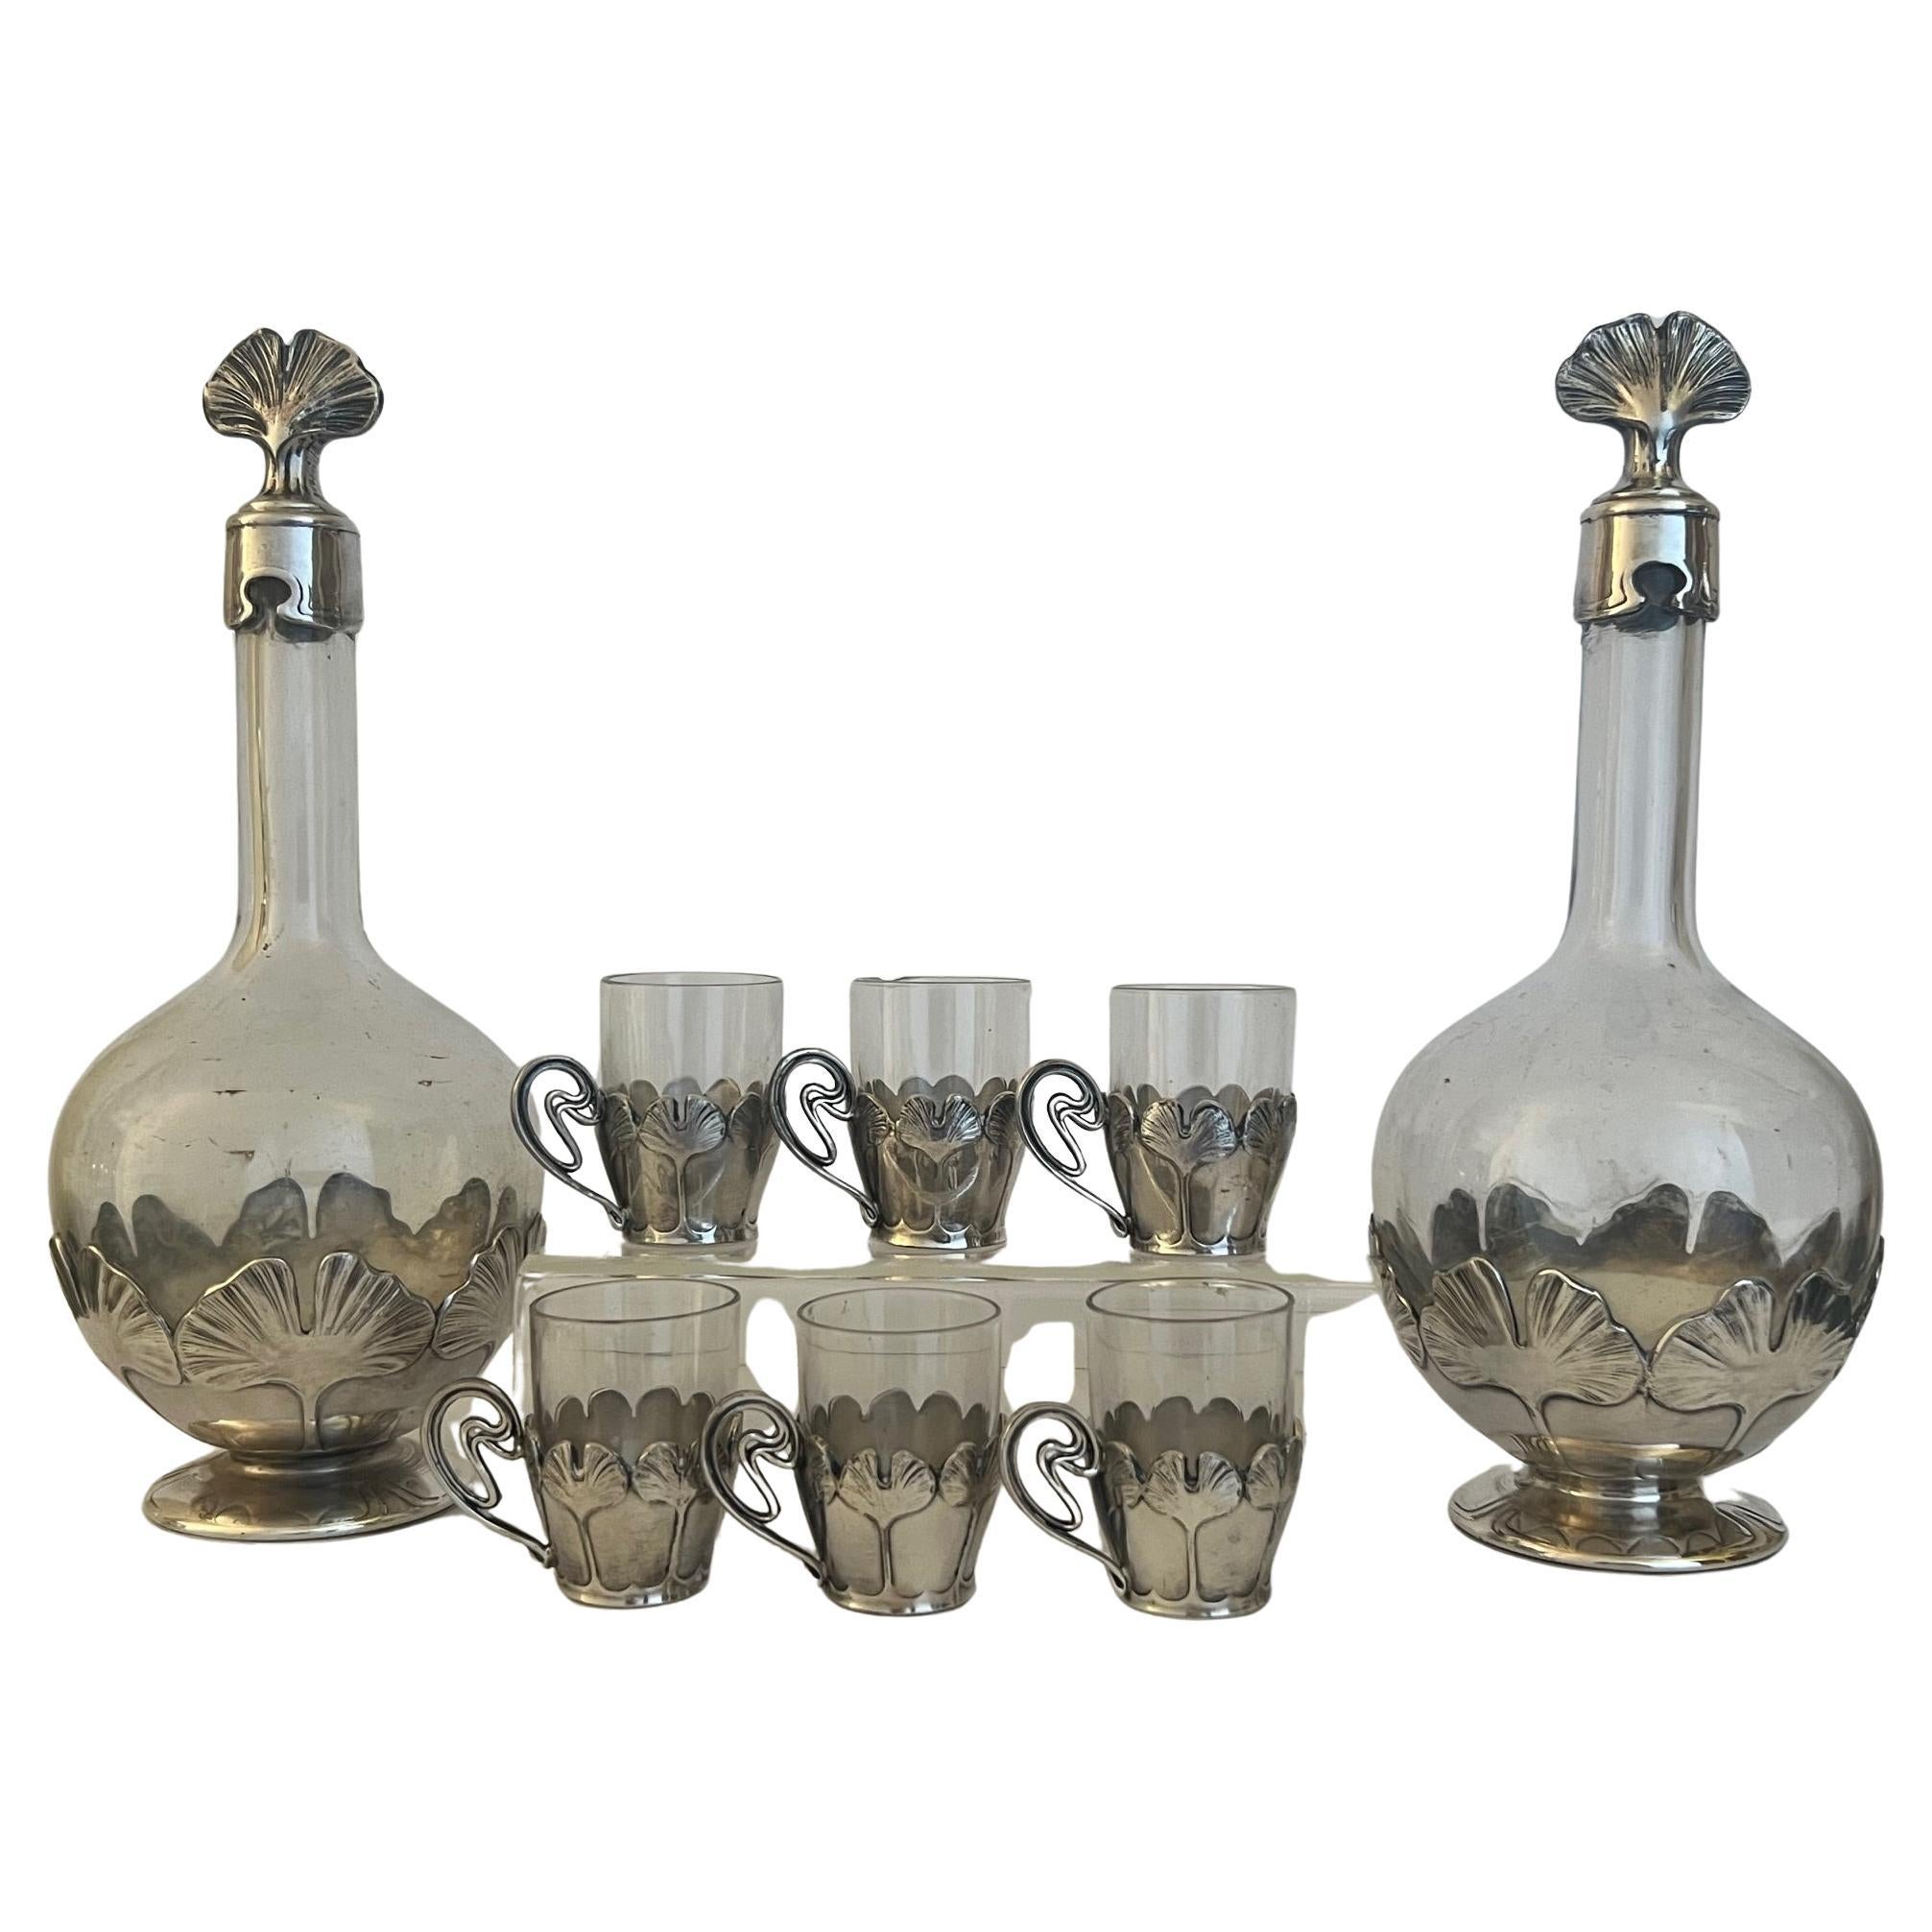 Early 20th Century Christofle Art Nouveau Decanter and Glass Set of 8 For Sale